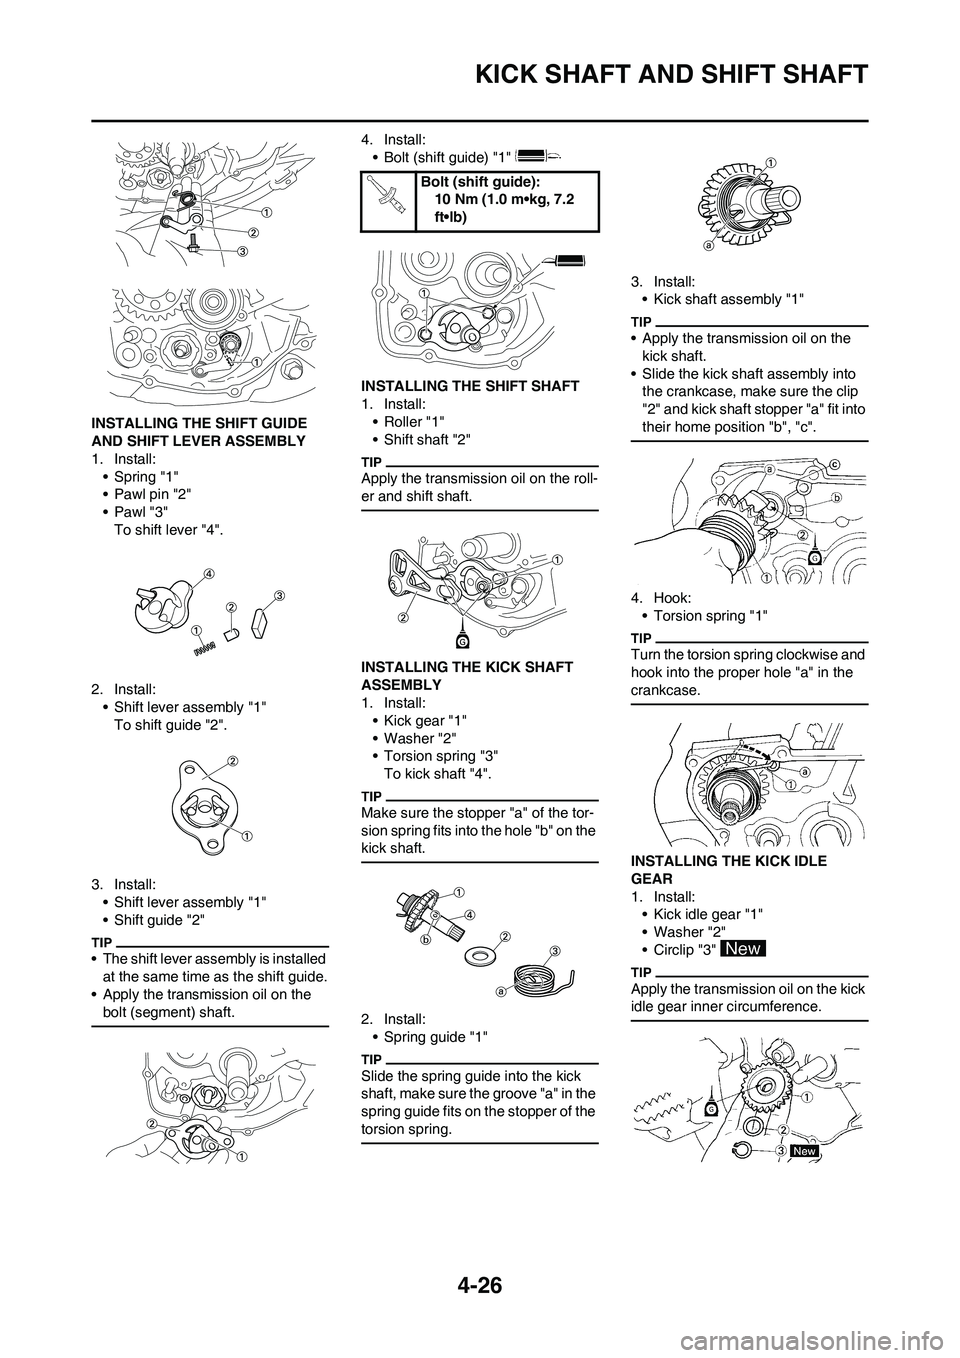 YAMAHA YZ125LC 2010  Owners Manual 4-26
KICK SHAFT AND SHIFT SHAFT
INSTALLING THE SHIFT GUIDE 
AND SHIFT LEVER ASSEMBLY
1. Install:
• Spring "1"
• Pawl pin "2"
•Pawl "3"
To shift lever "4".
2. Install:
• Shift lever assembly "1